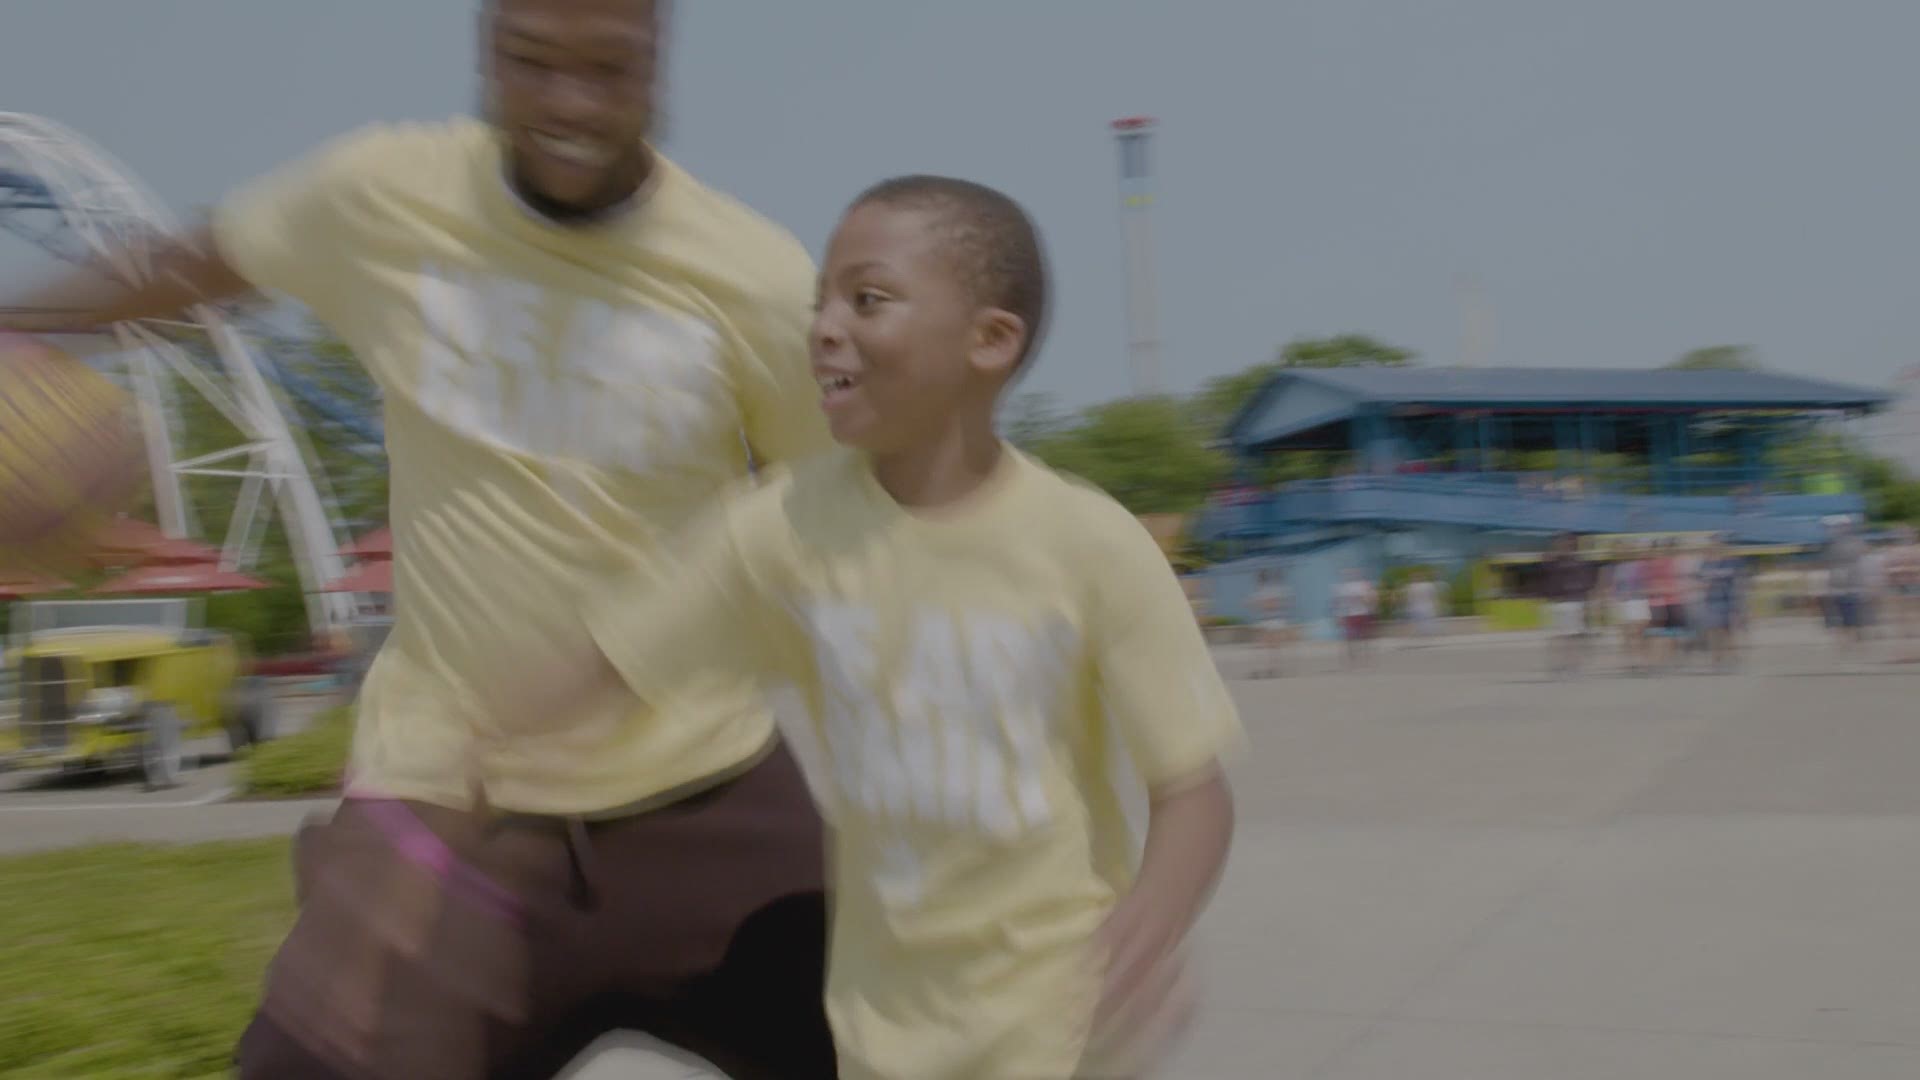 Aug. 14, 2018: The LeBron James Family Foundation hosted more than 8,000 students and their families at Cedar Point for their annual event. (Video courtesy of LeBron James Family Foundation)